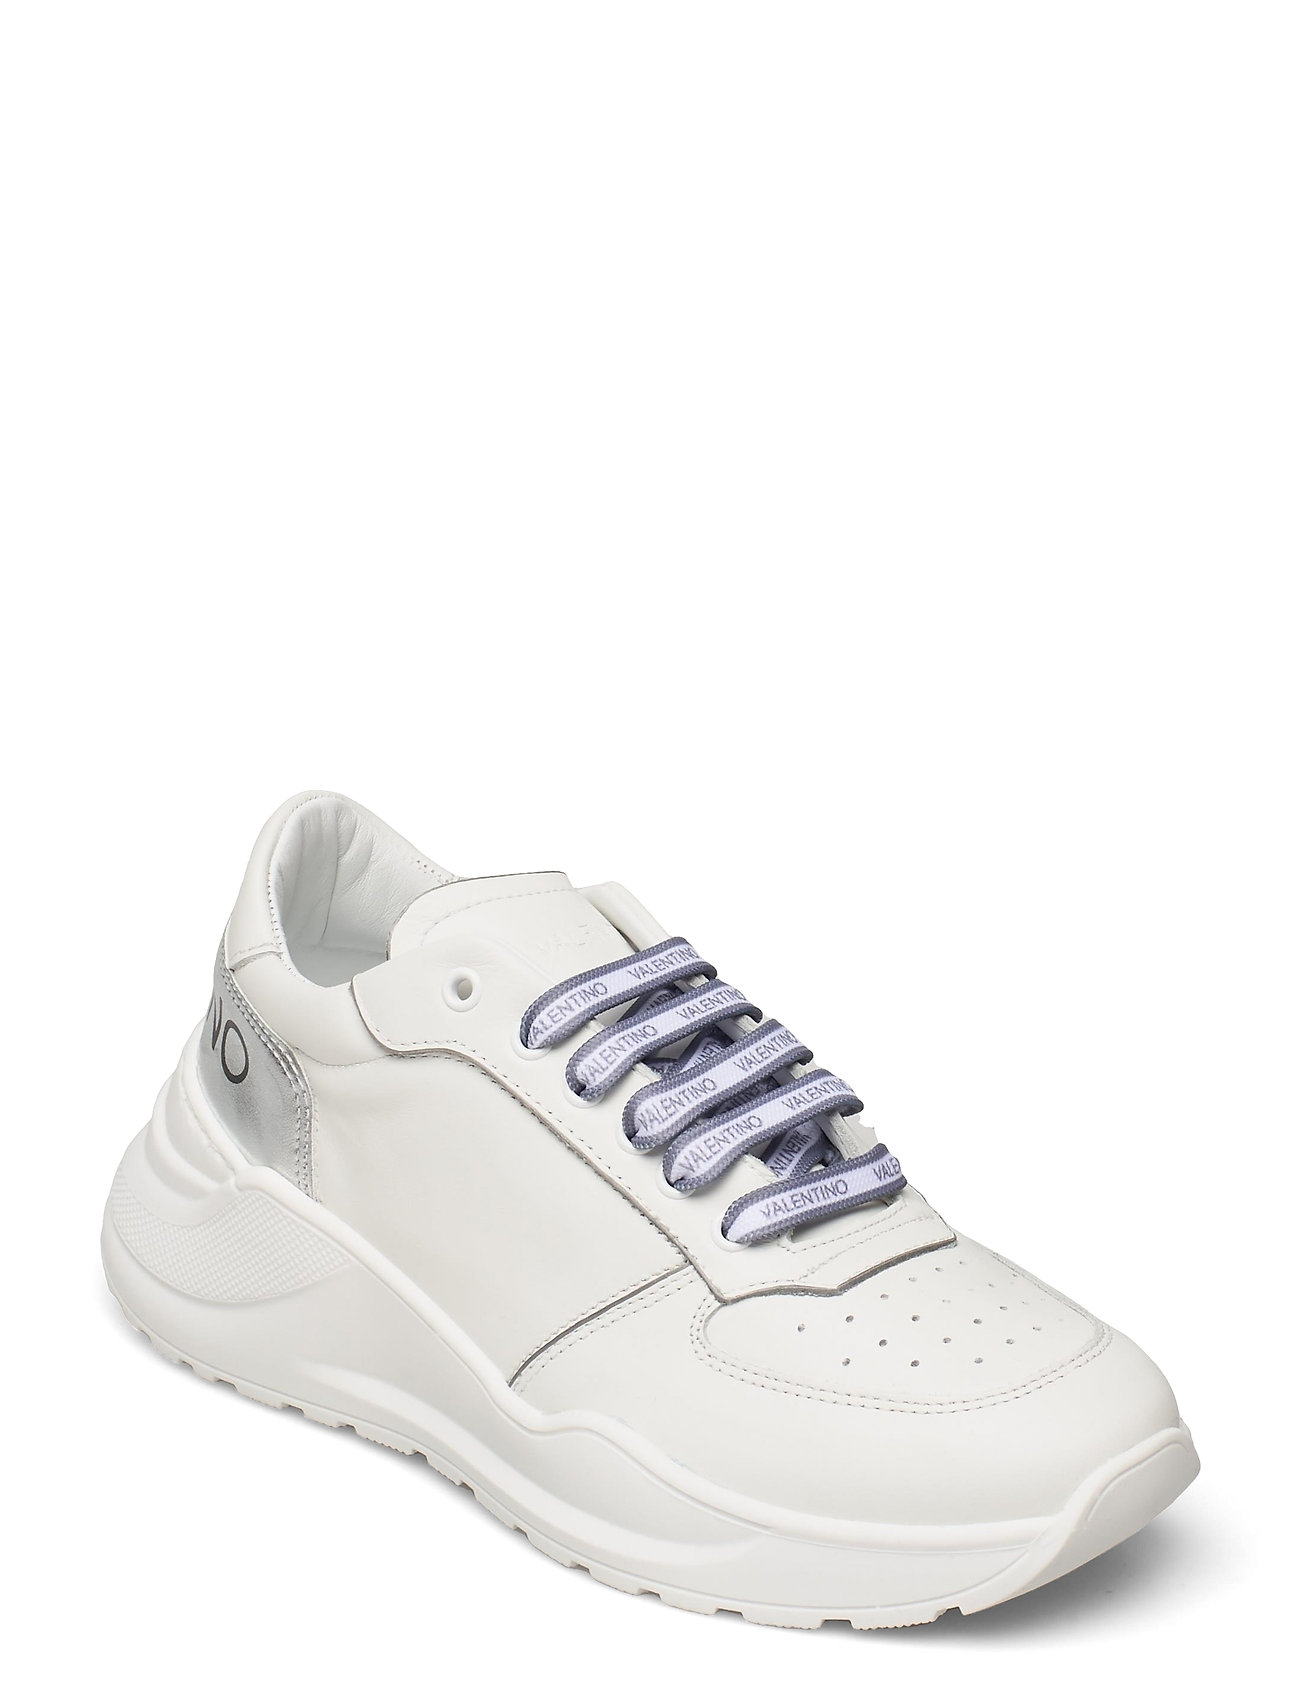 Valentino Shoes sneakers – Running Low-top Sneakers Valentino Shoes til i Hvid - Pashion.dk